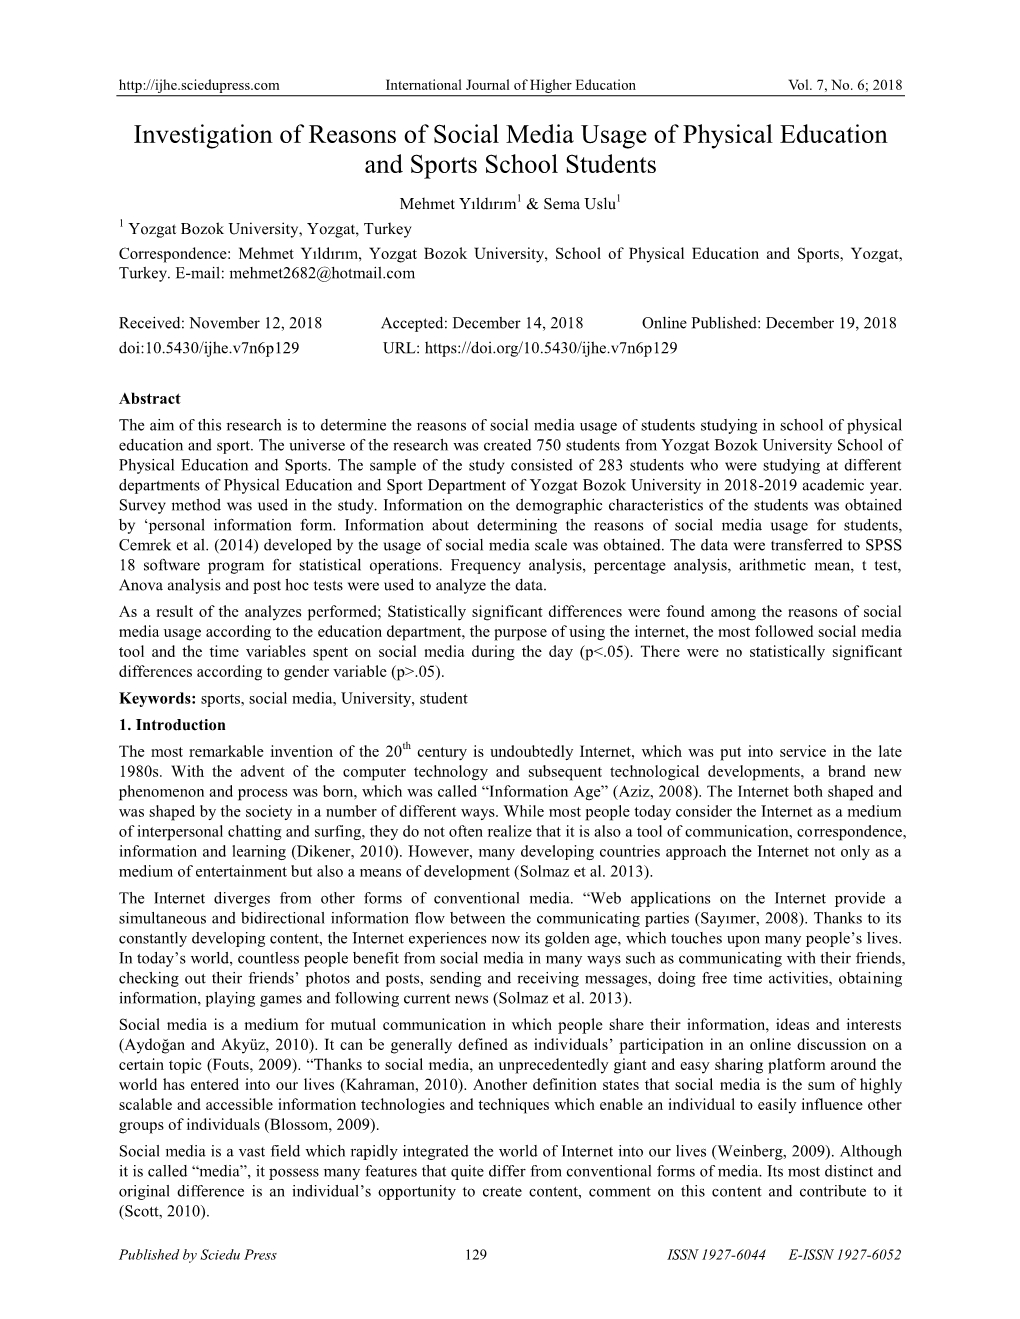 Investigation of Reasons of Social Media Usage of Physical Education and Sports School Students